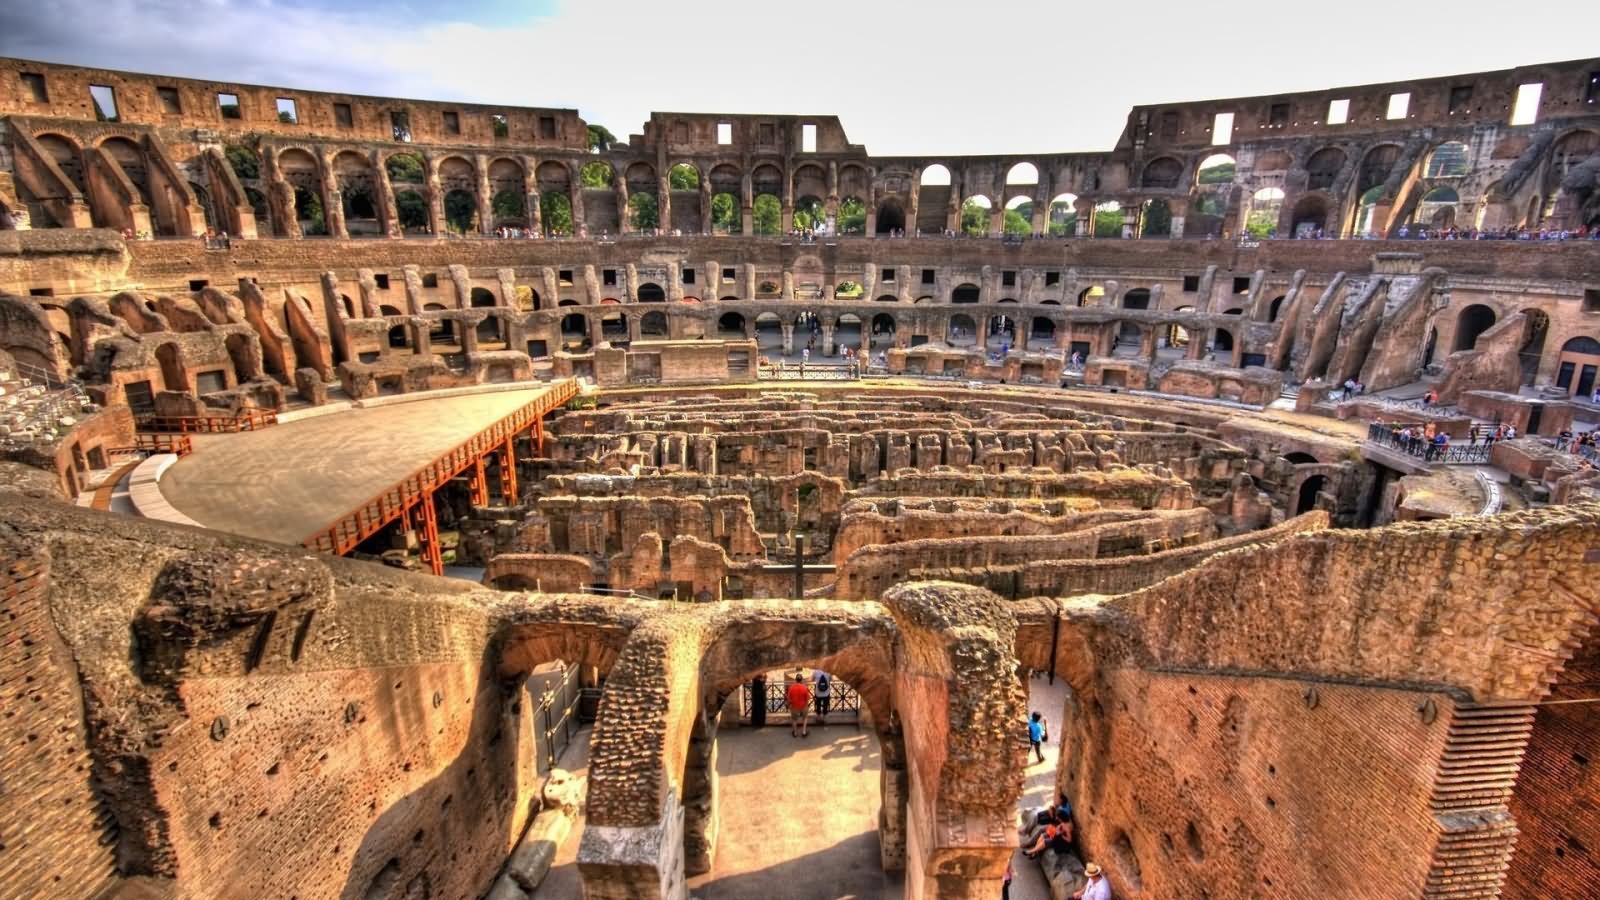 35 Incredible Inside View Of The Colosseum, Rome Pictures